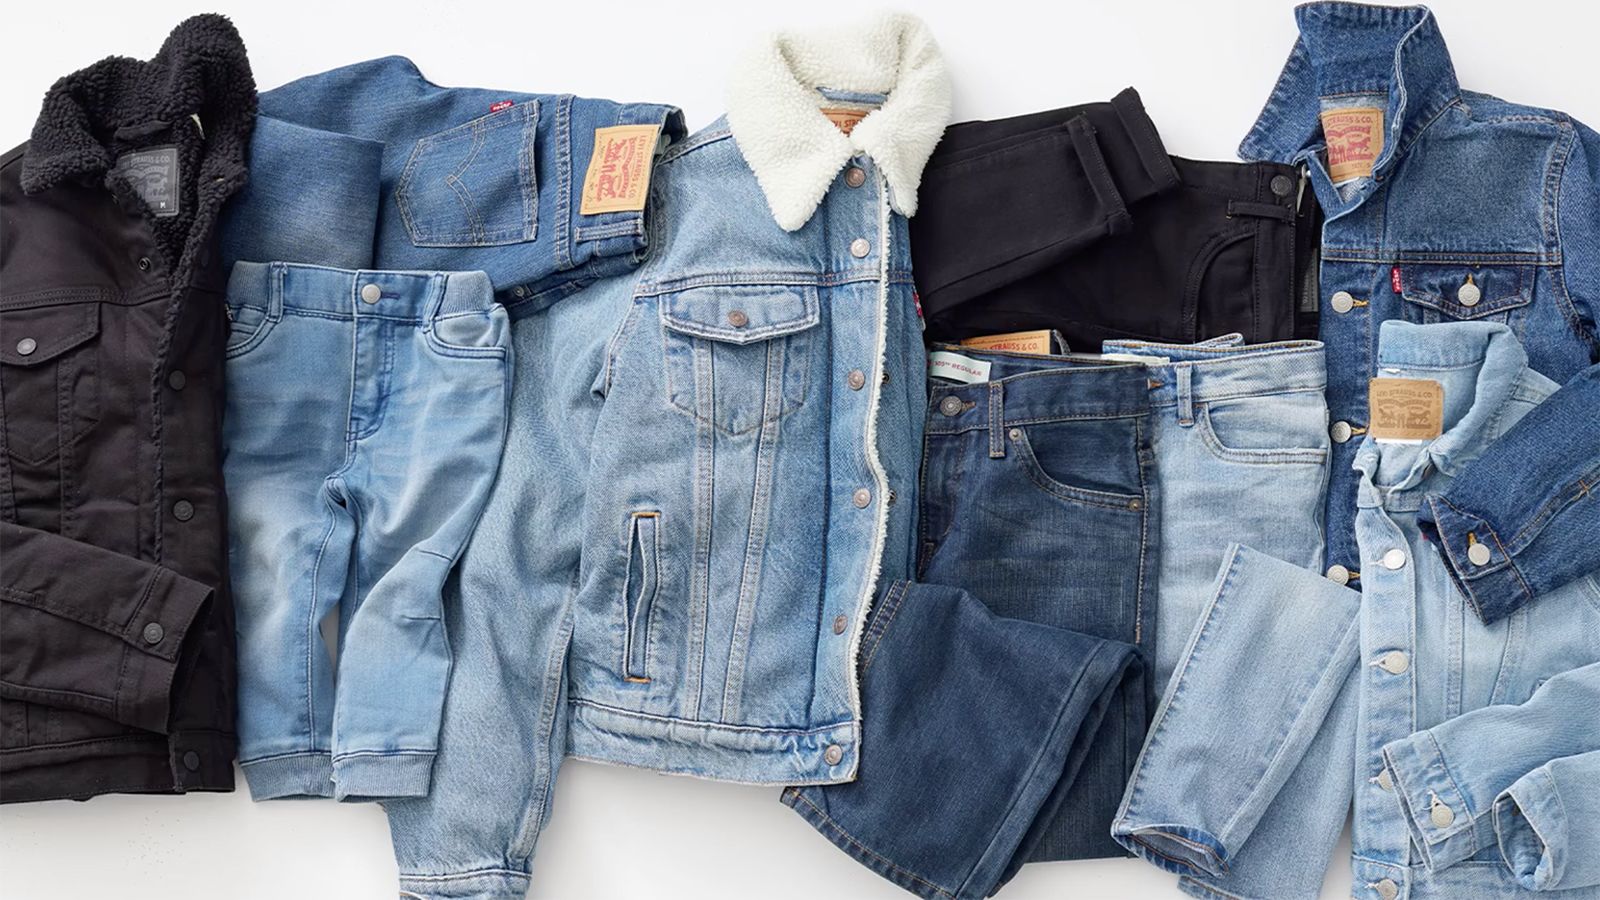 Levi’s sale: Take 40% off jeans, jackets and more